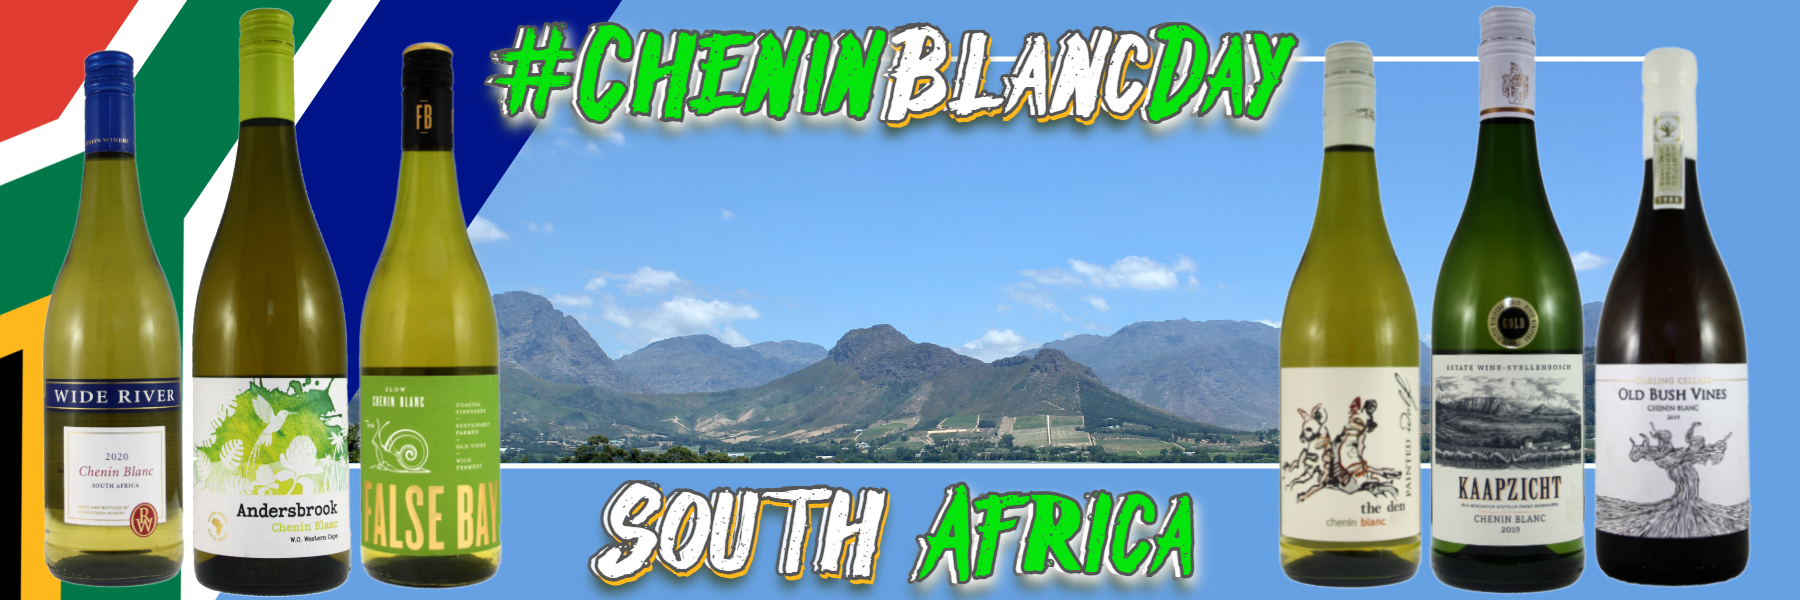 Buy Chenin Blanc wines from Frazier's for #CheninBlancDay